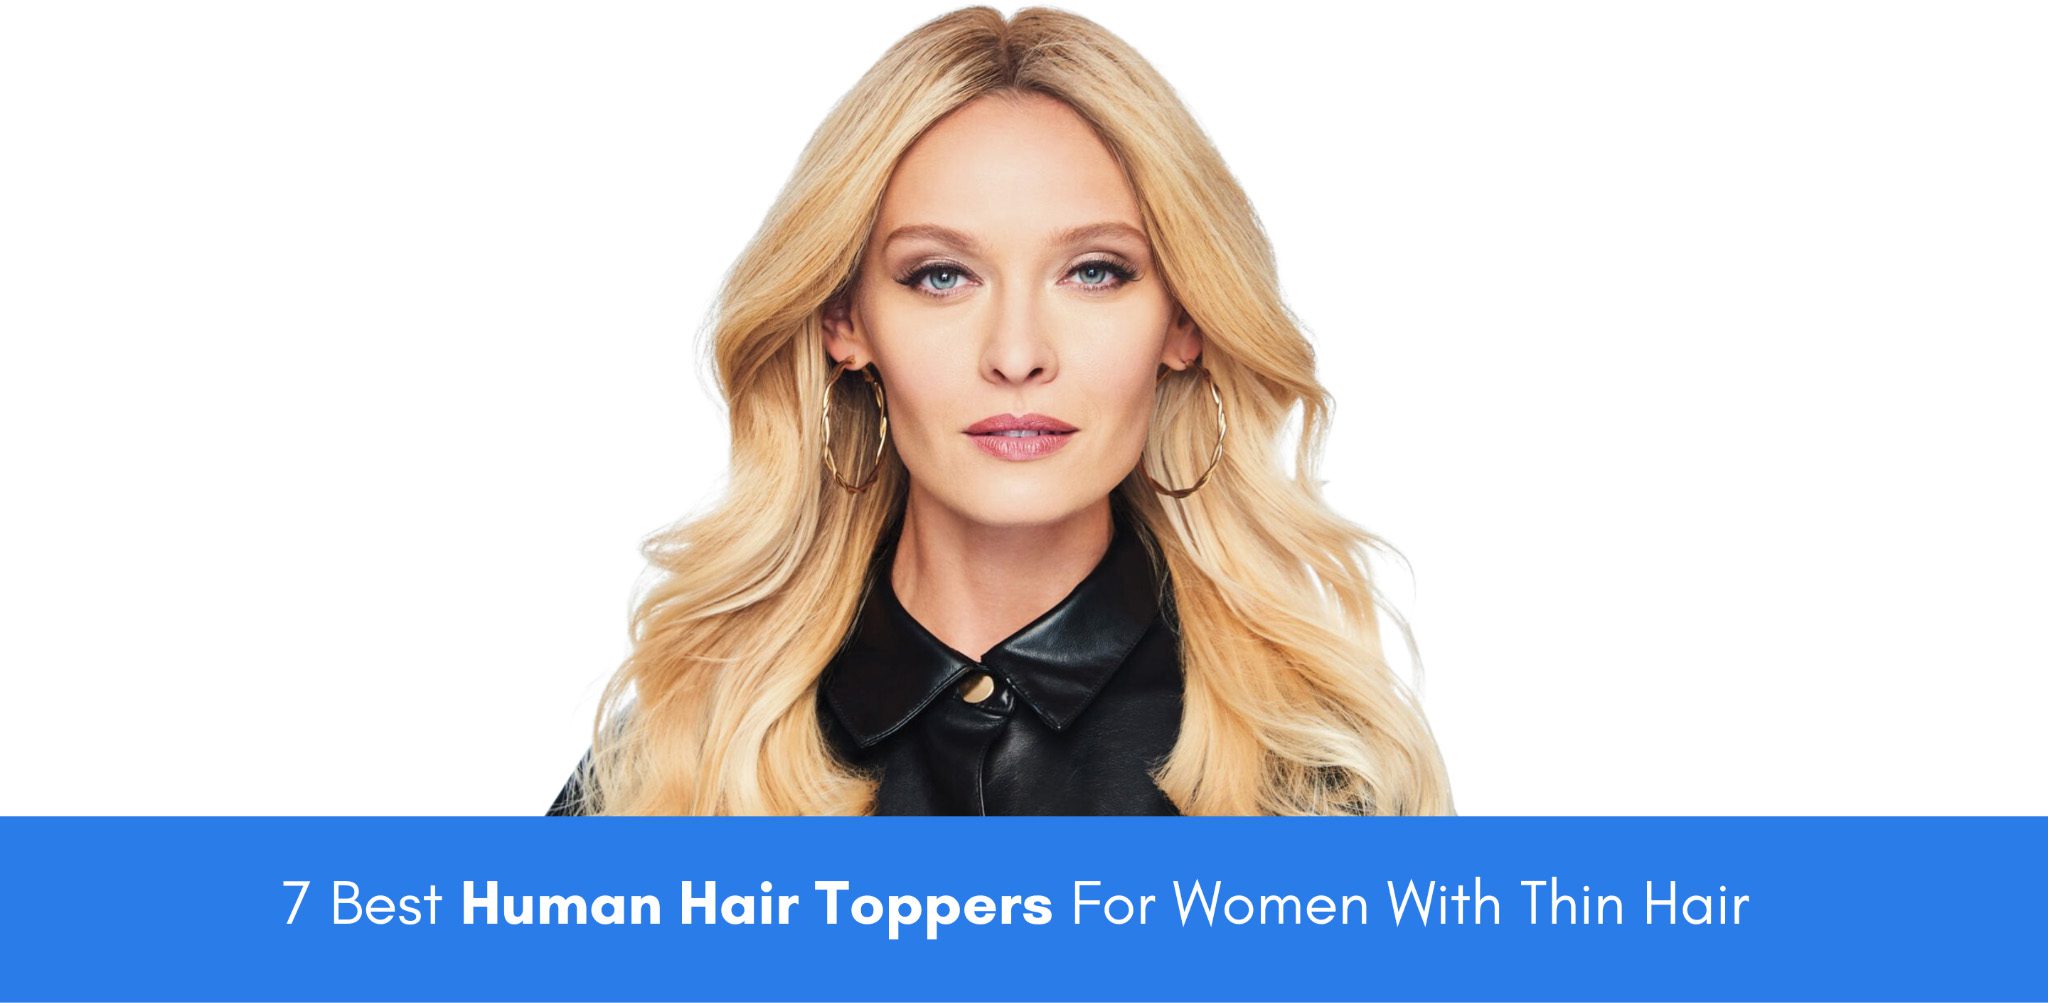 7 Best Human Hair Toppers For Women With Thin Hair